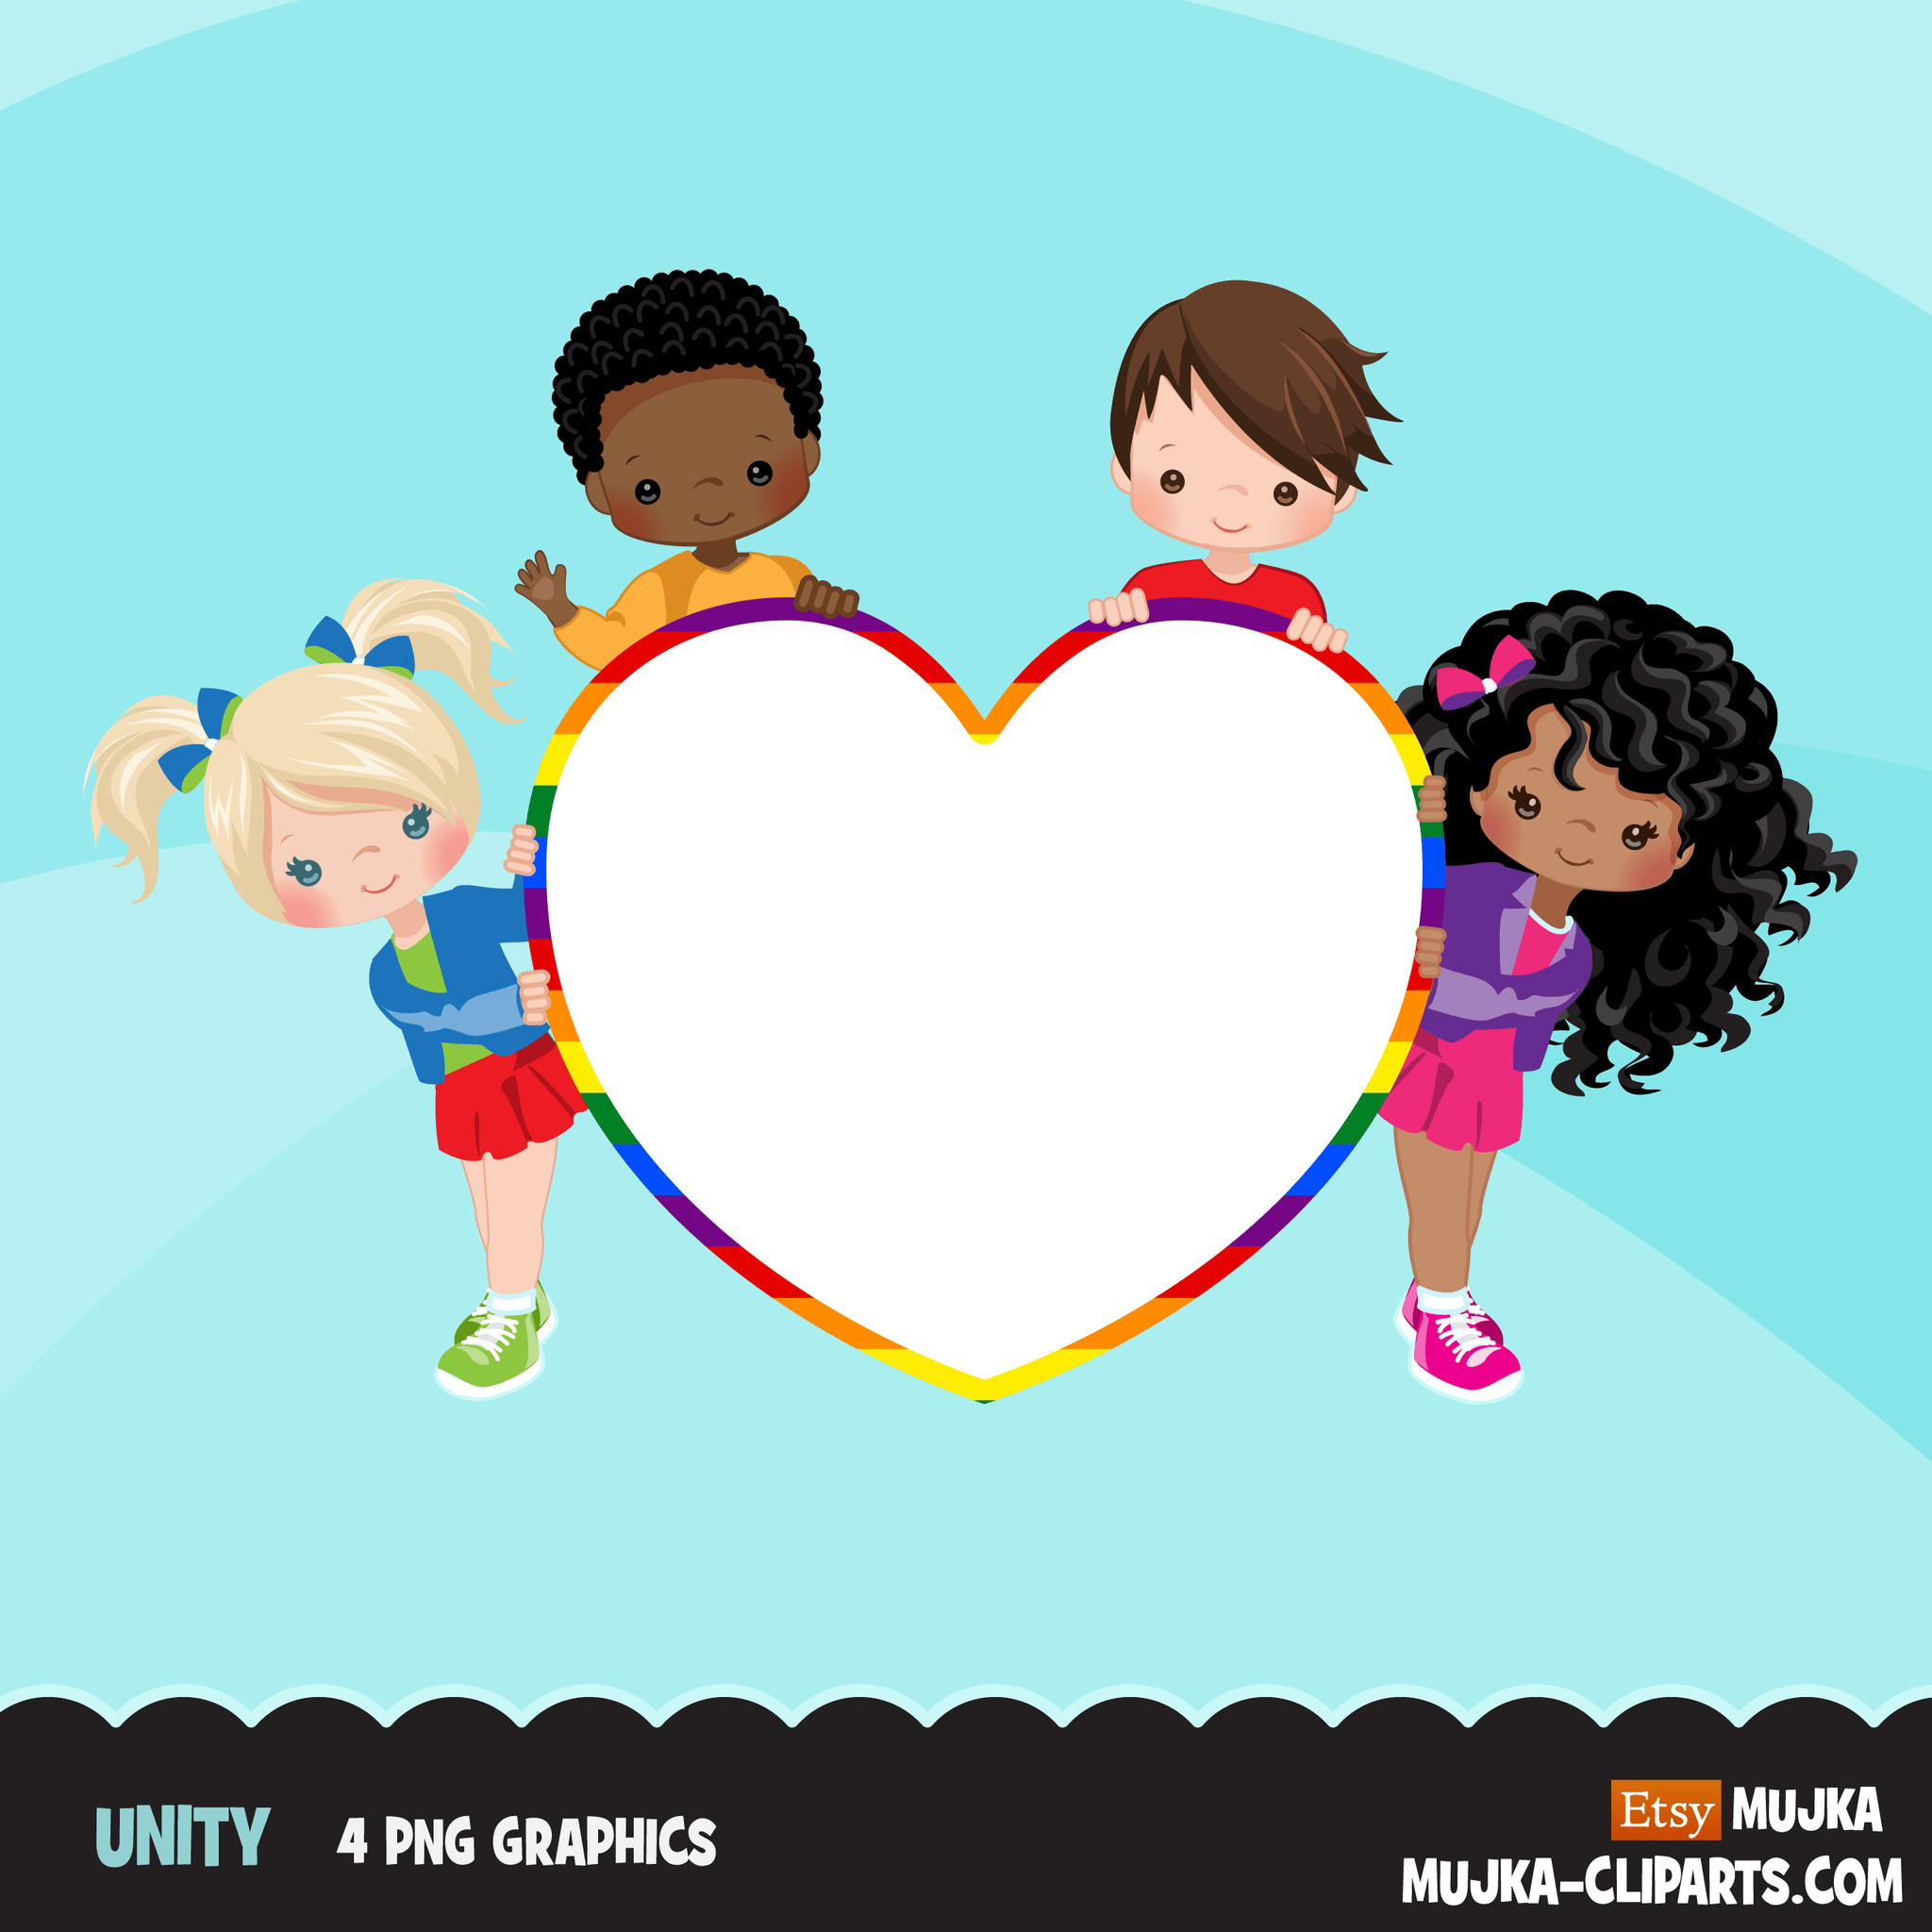 Free Unity clipart, Brothers and sisters, heart shape globe rainbow digital PNG